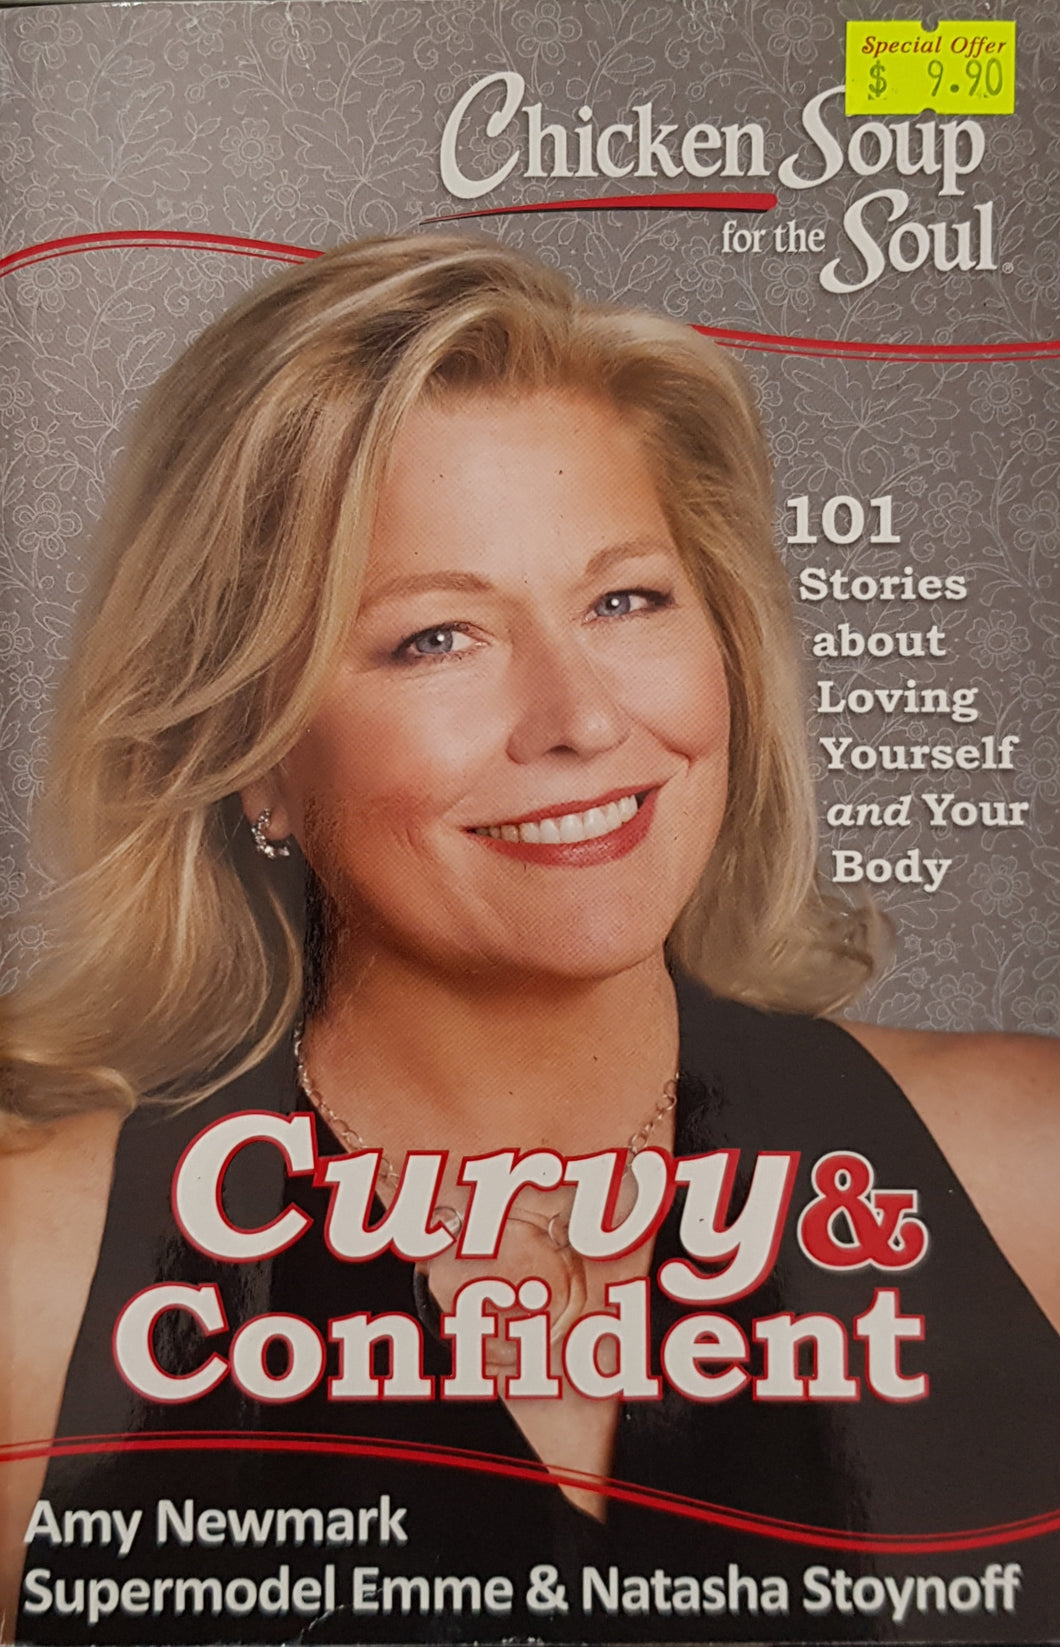 Chicken Soup for the Soul: Curvy & Confident : 101 Stories about Loving Yourself and Your Body - Amy Newmark & Emme Aronson & Natasha Stoynoff